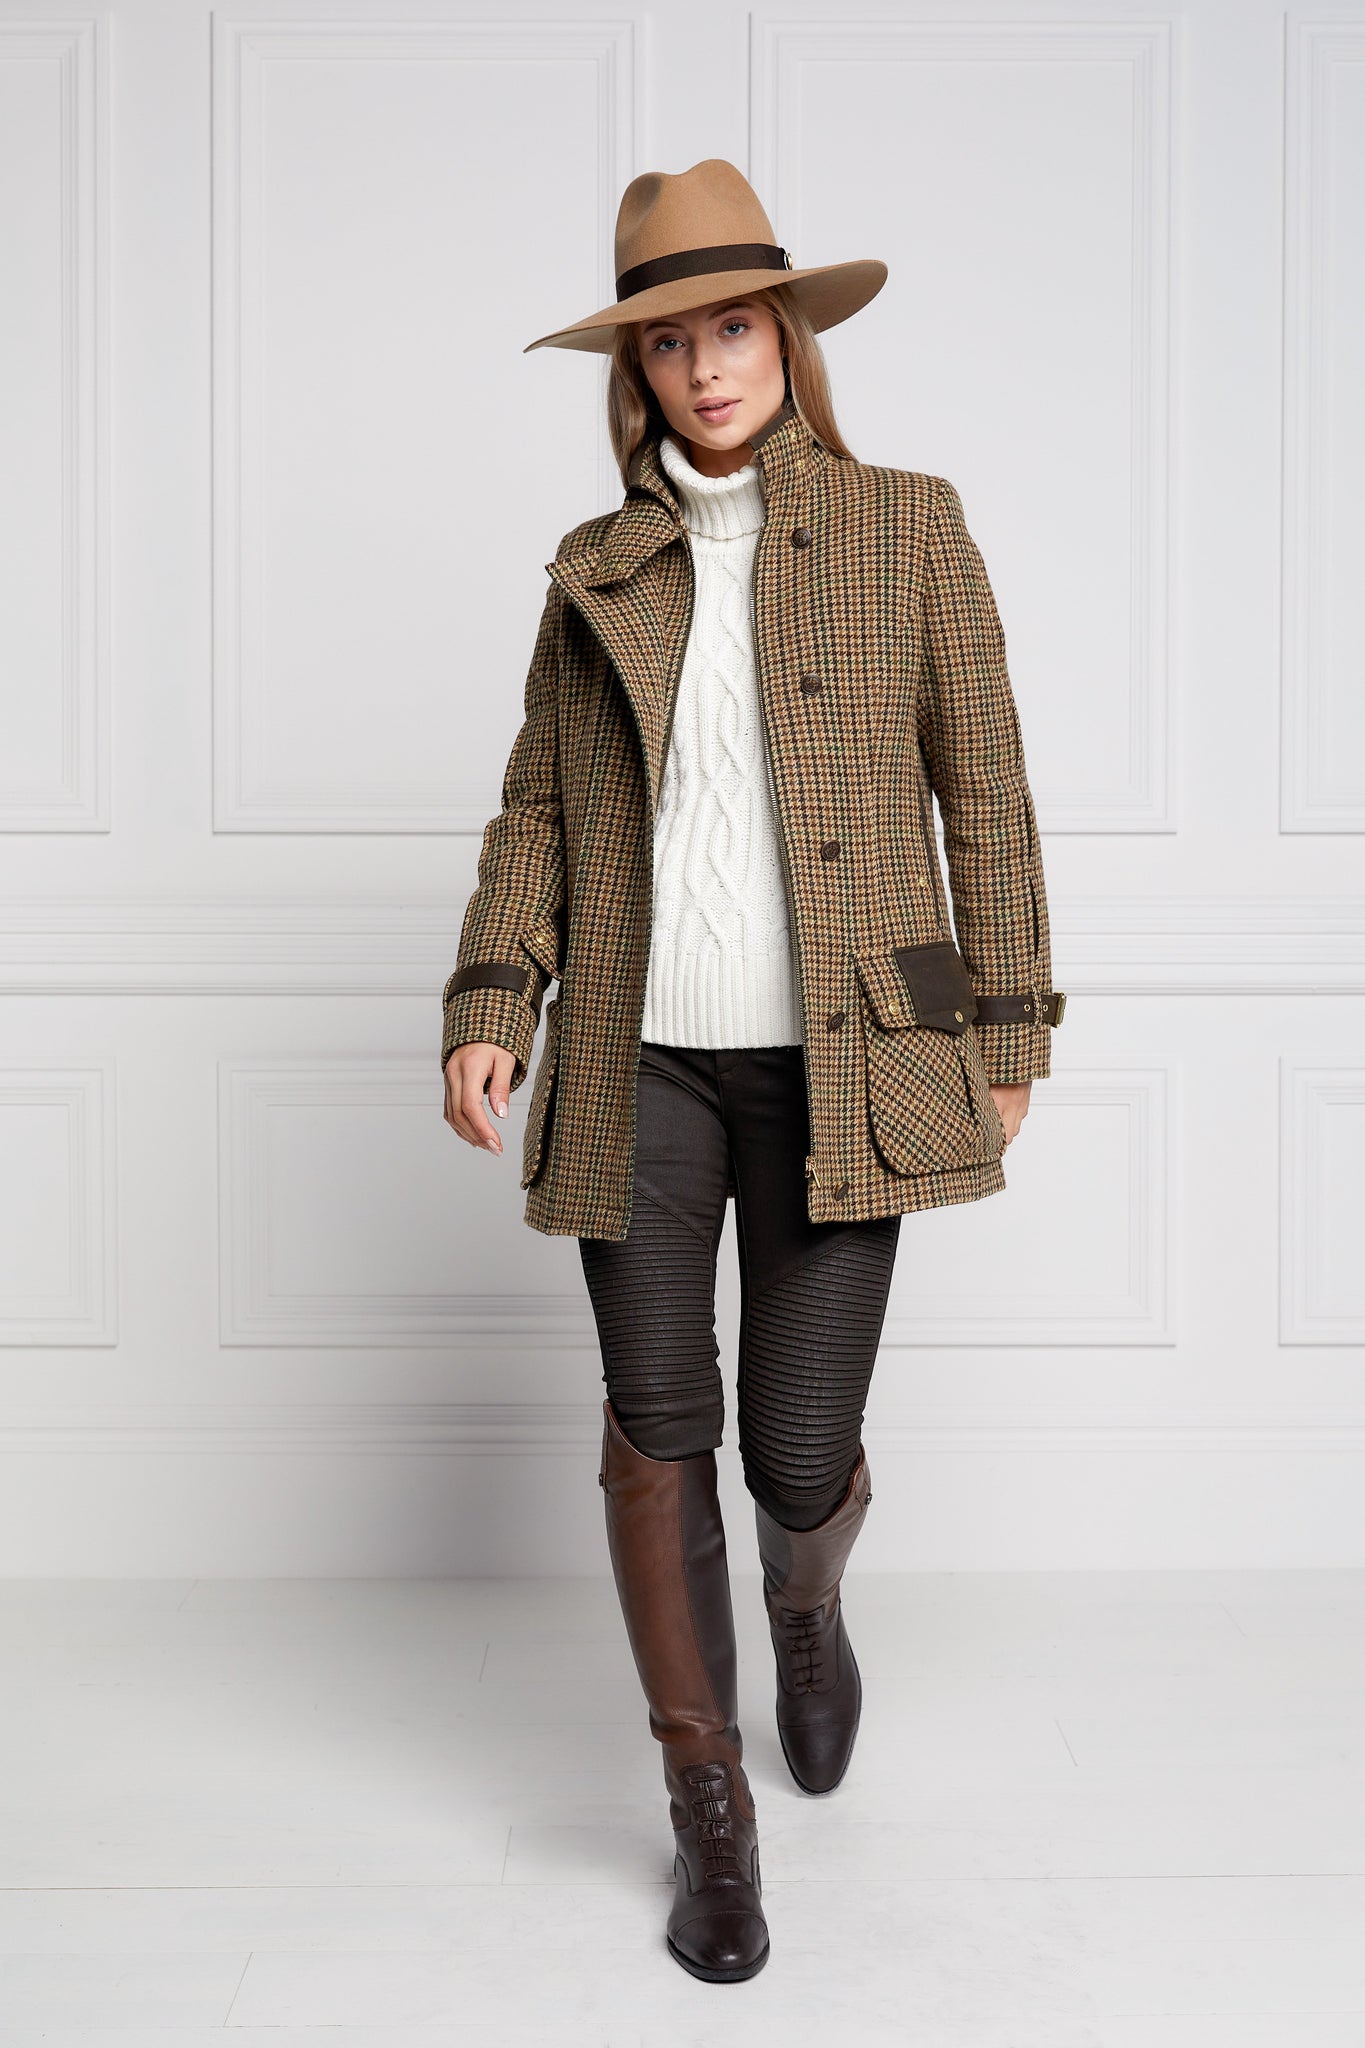 Woman in green and brown tweed field coat in brown trilby hat